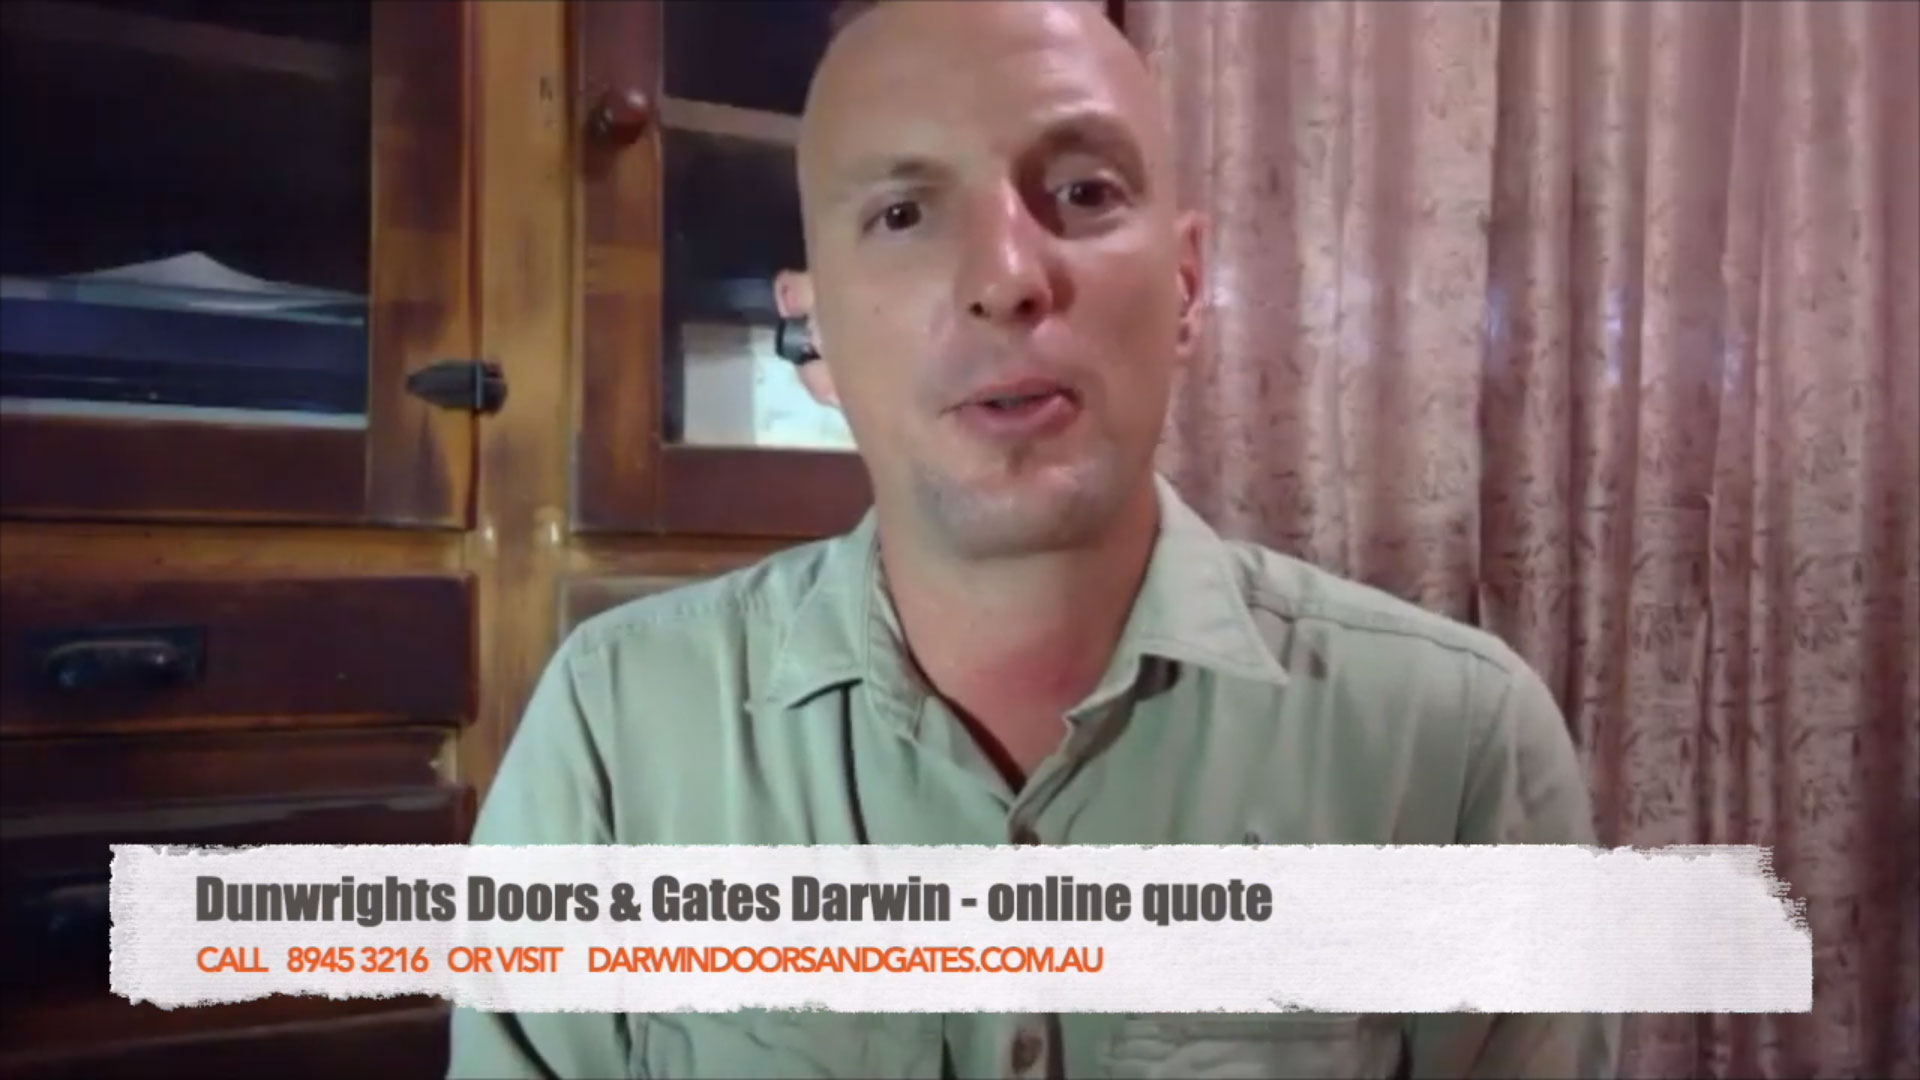 Dunwrights Doors and Gates online quotes for Darwin and Palmerston